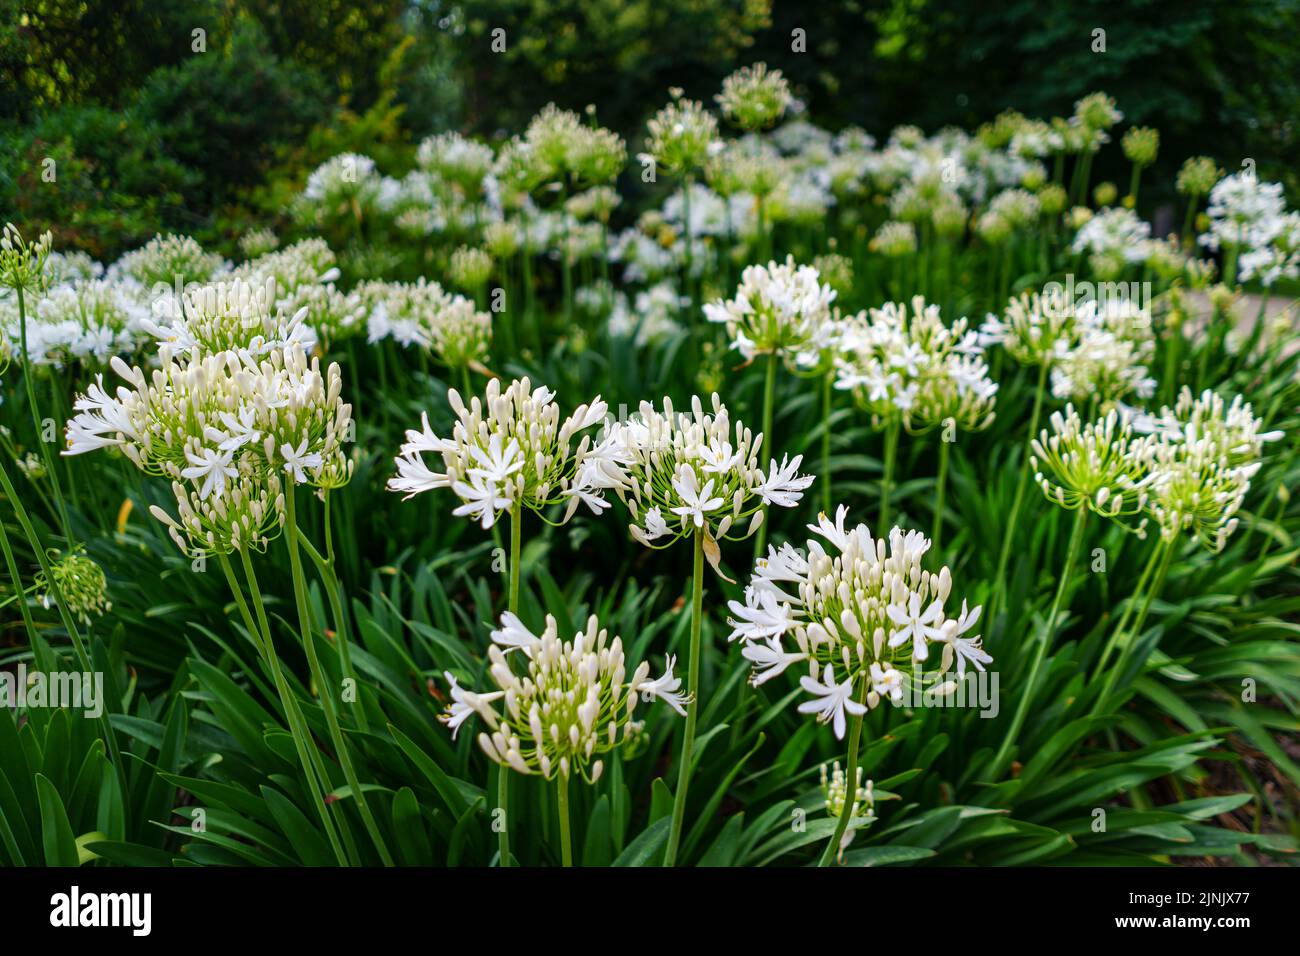 Garden with multiple white flowers and stems with green leaves in summer. Stock Photo